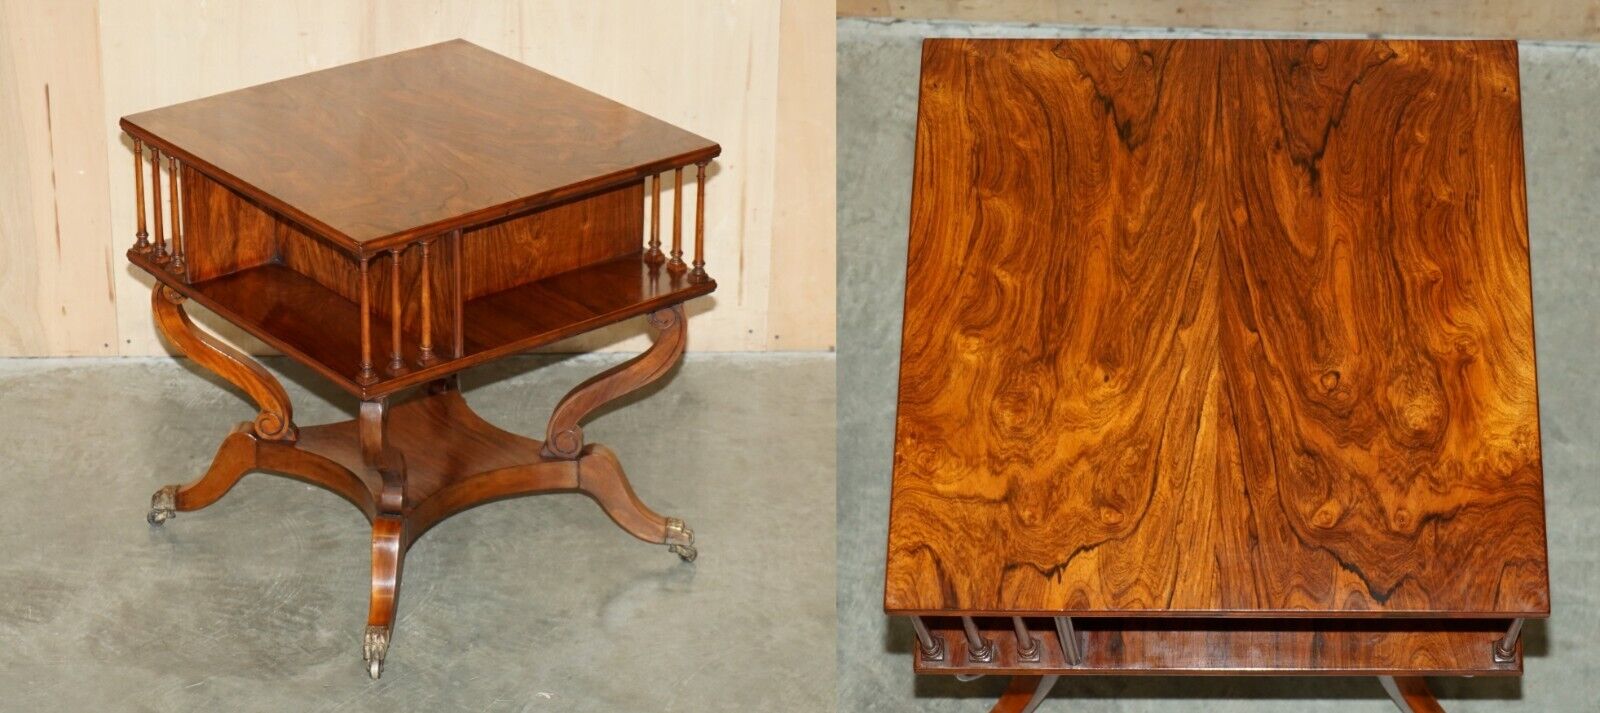 FULLY RESTORED MUSEUM QUALITY ENGLISH REGENCY CIRCA 1820 ROSEWOOD BOOK TABLE